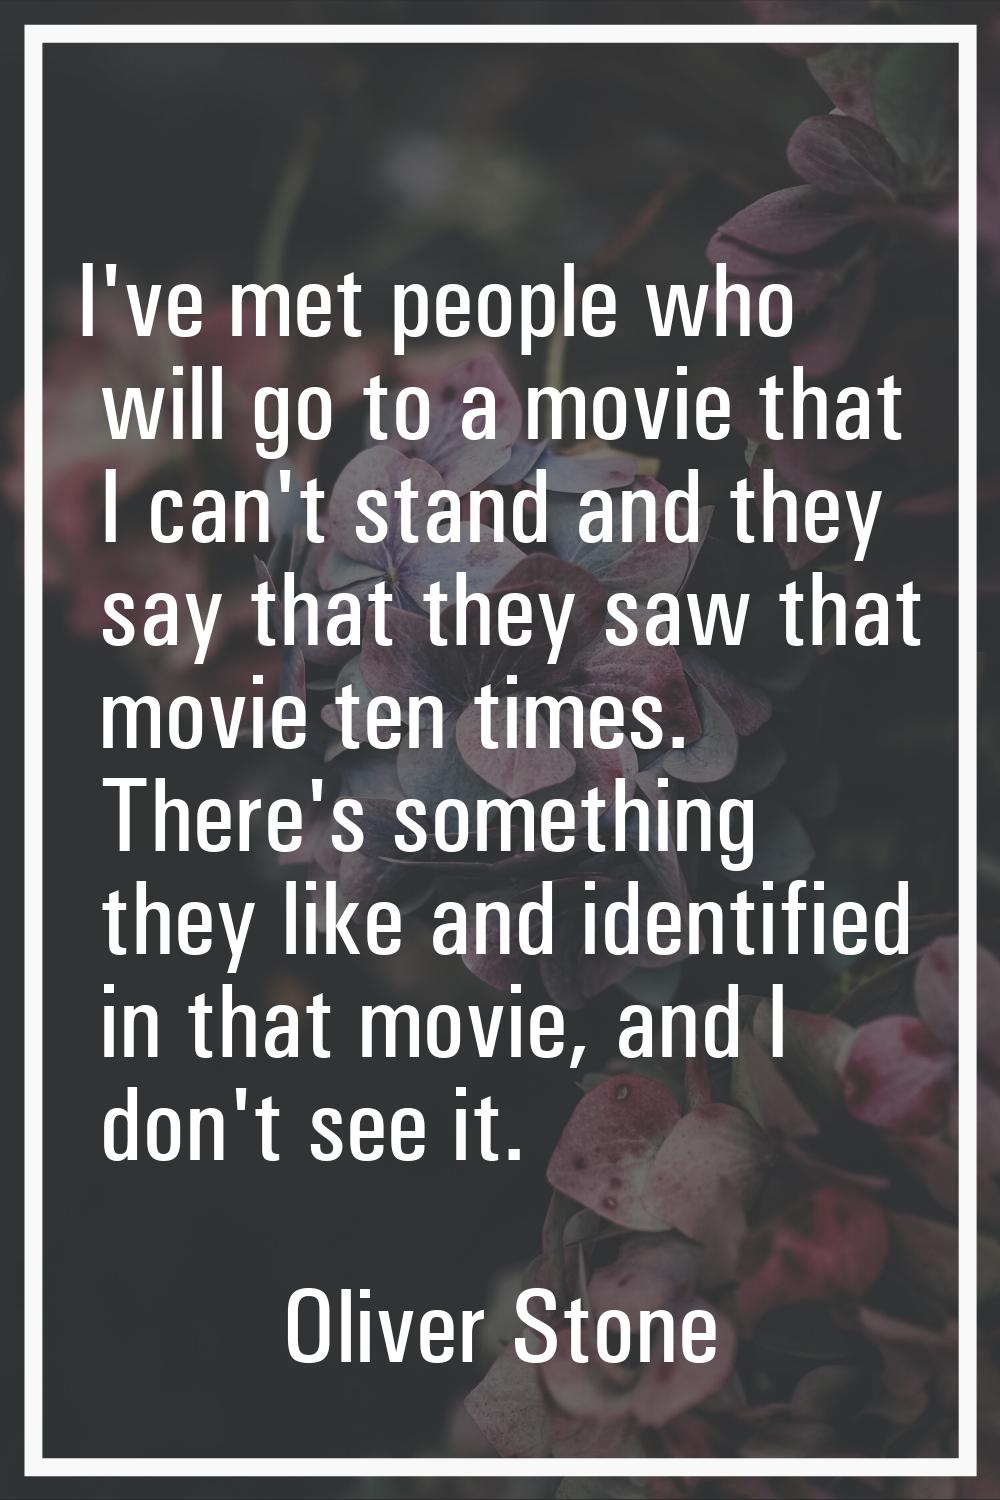 I've met people who will go to a movie that I can't stand and they say that they saw that movie ten